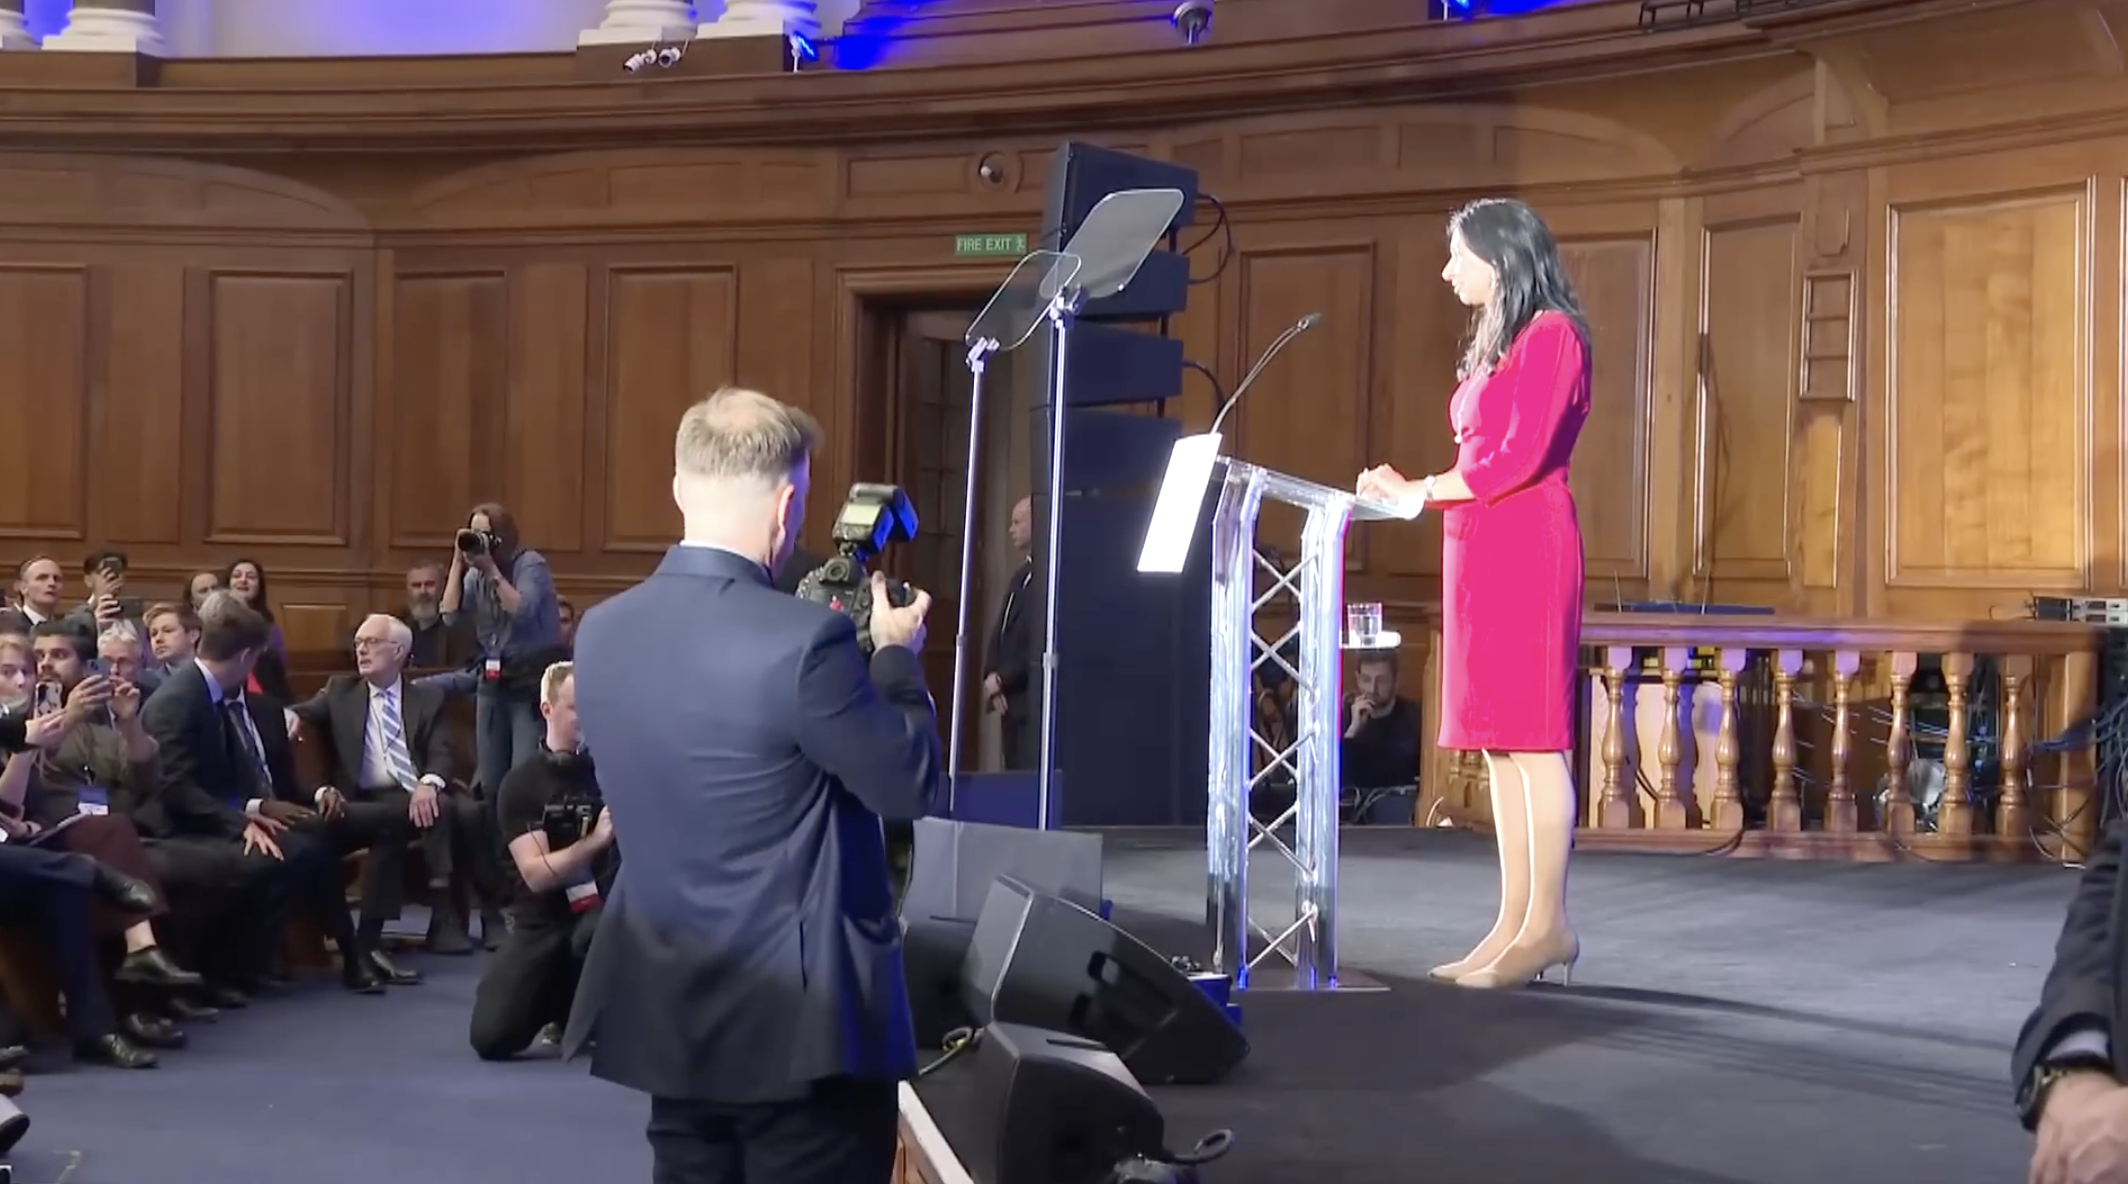 JOB DONE: Cruella Braverman addressing the conference of National Socialists – sorry, National Conservatism 